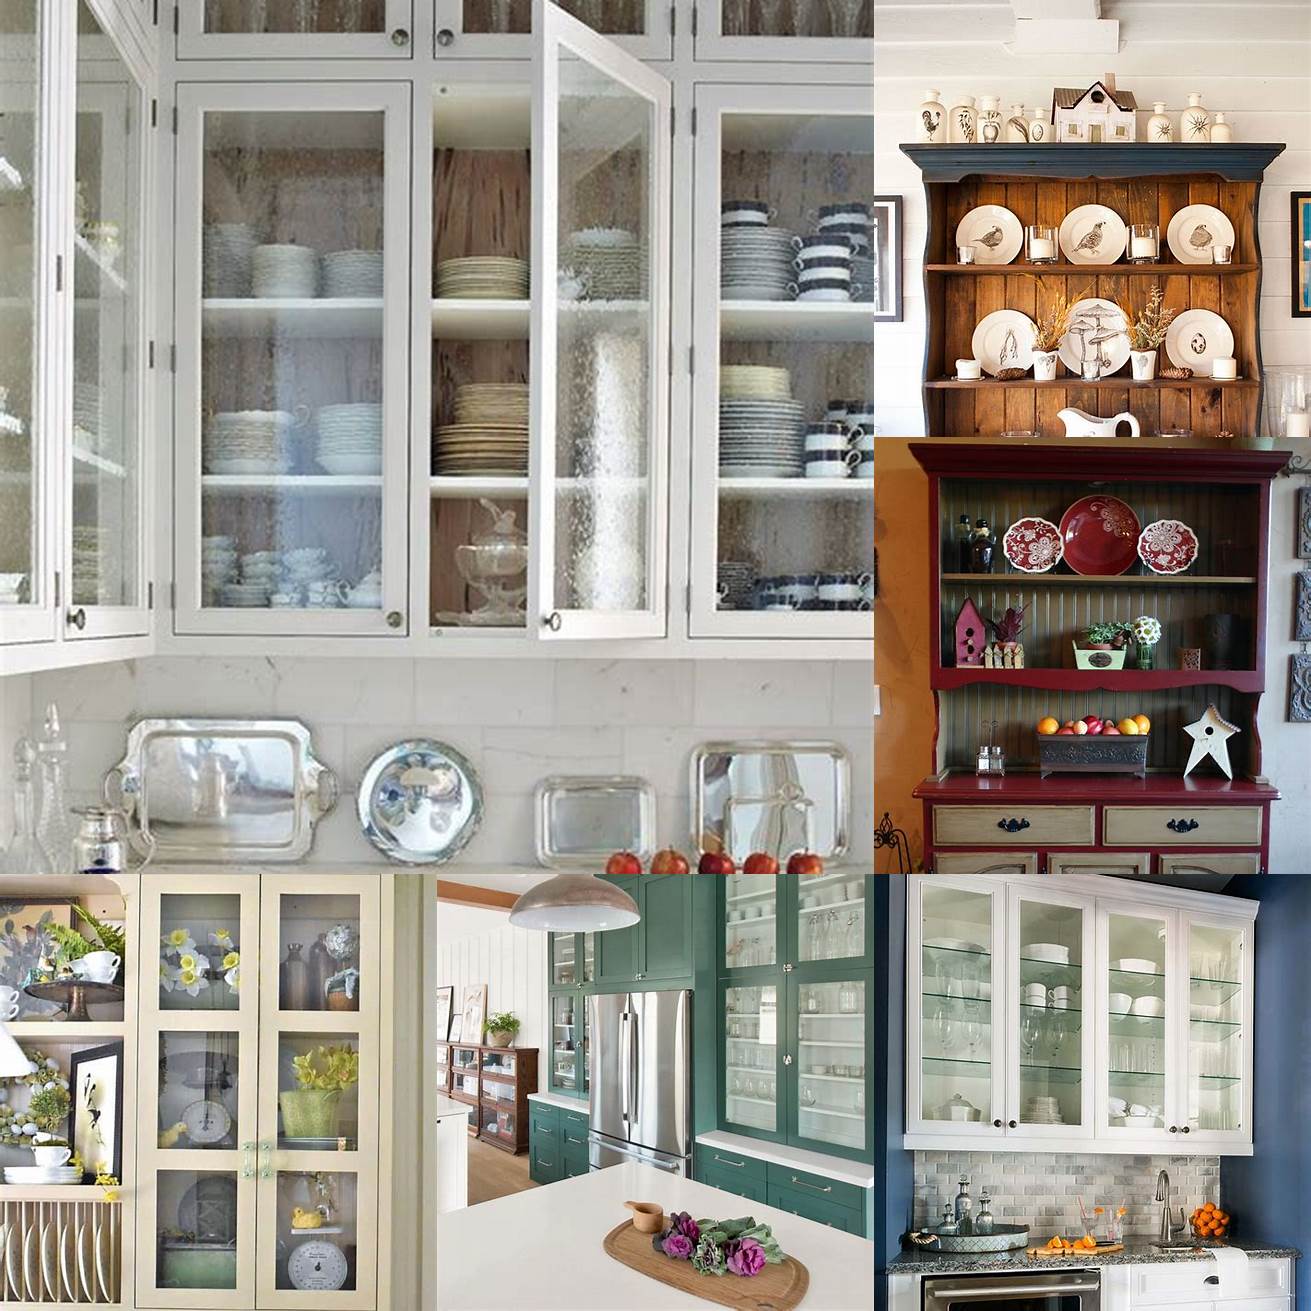 Glass-fronted hutch with colorful dishware